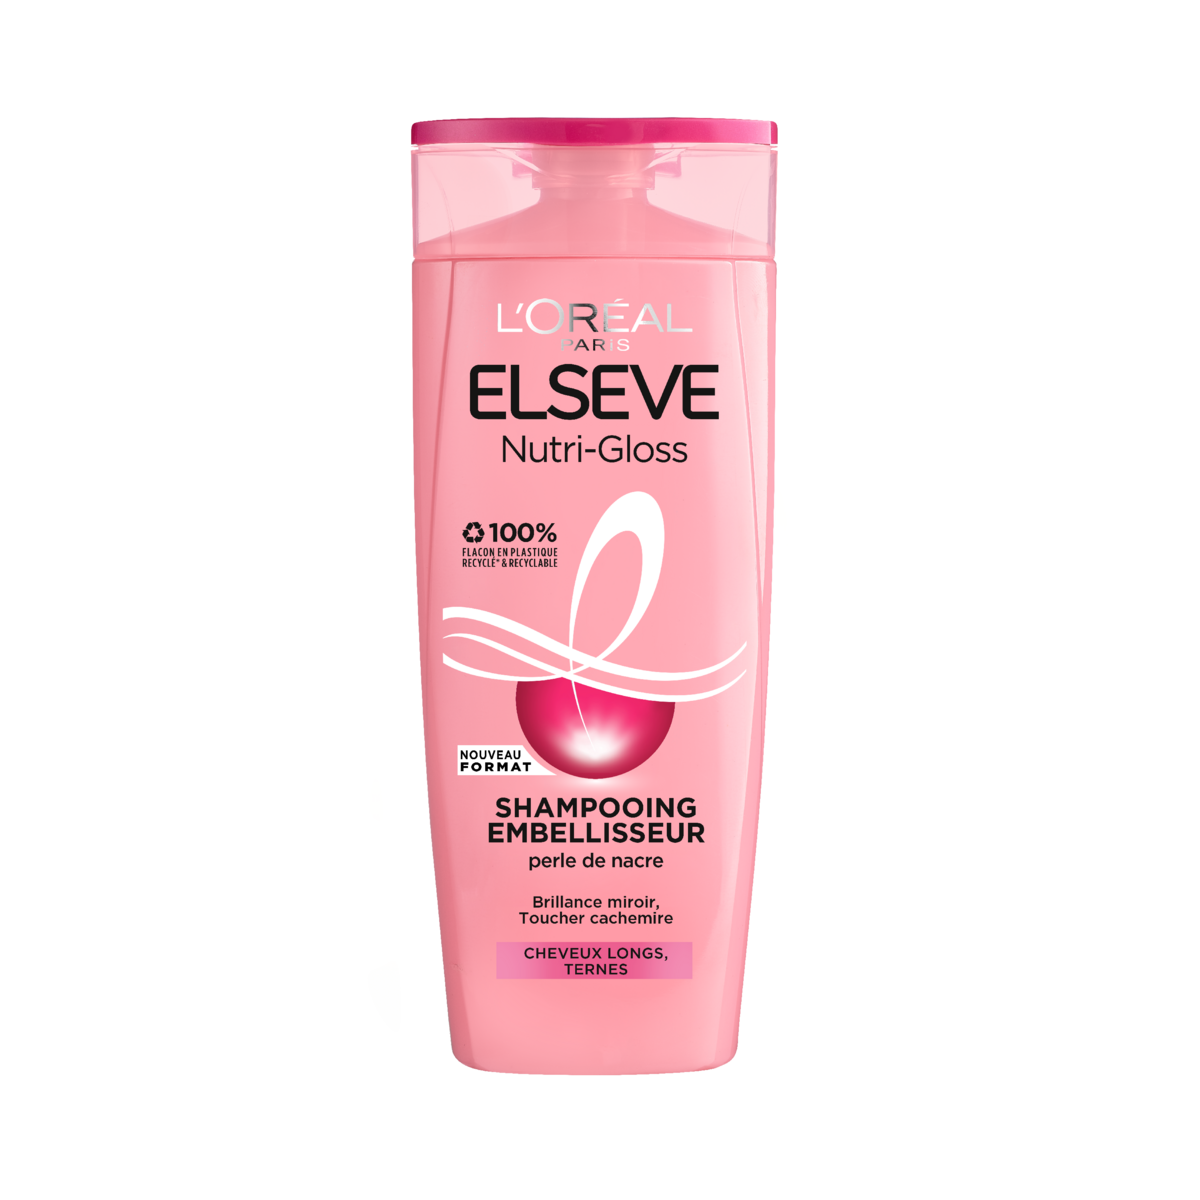 Nutri-Gloss Dull Beautifying Shampoo Elseve - L'Oréal | Buy Online | My French Grocery